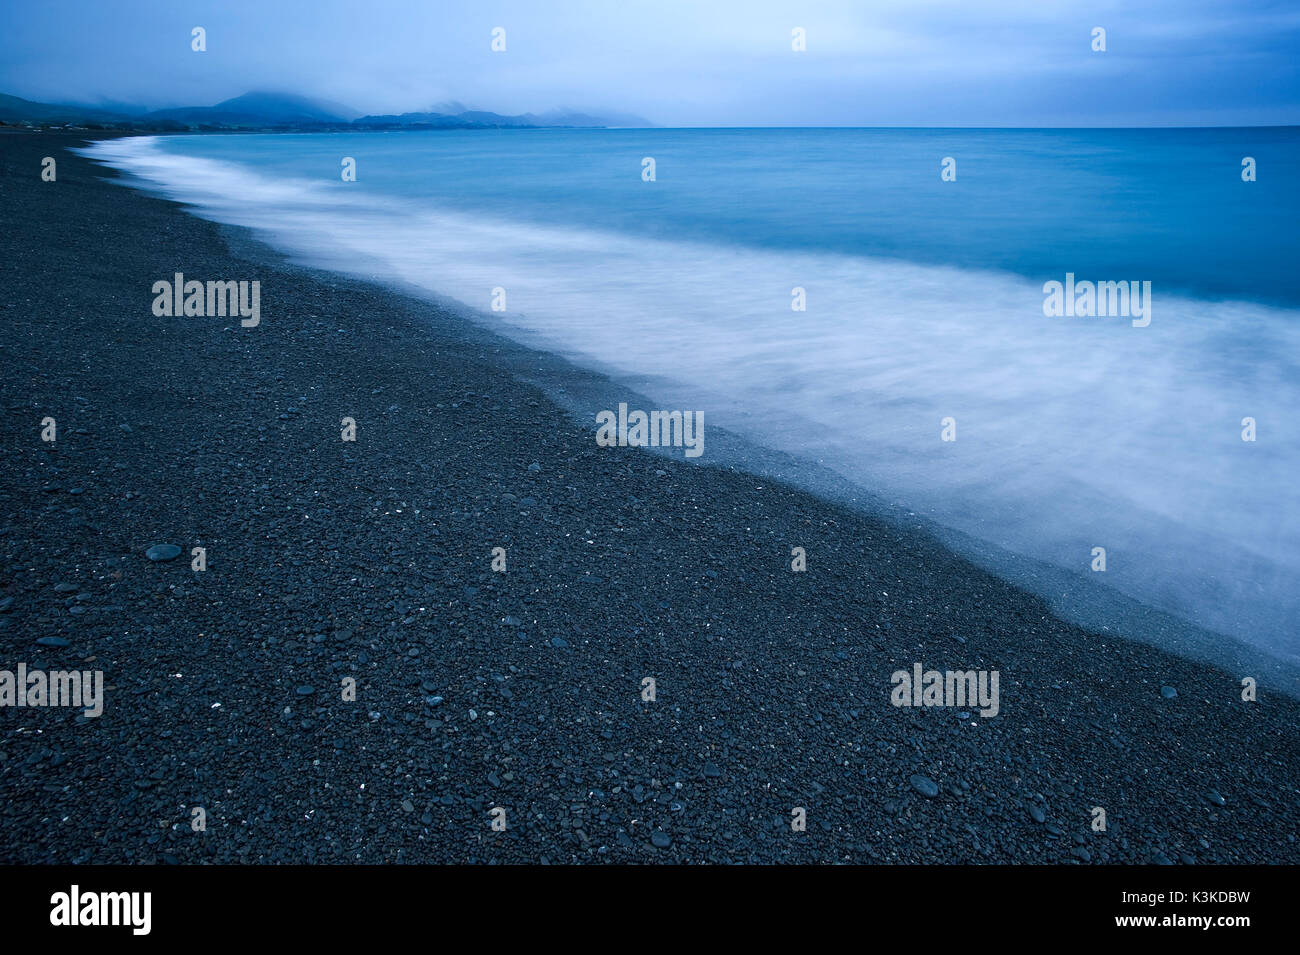 Long time exposure on the beach of Kaikoura, New Zealand. The black beach, blue sea, rain mood and in the background mountains prove a dark light mood. Stock Photo